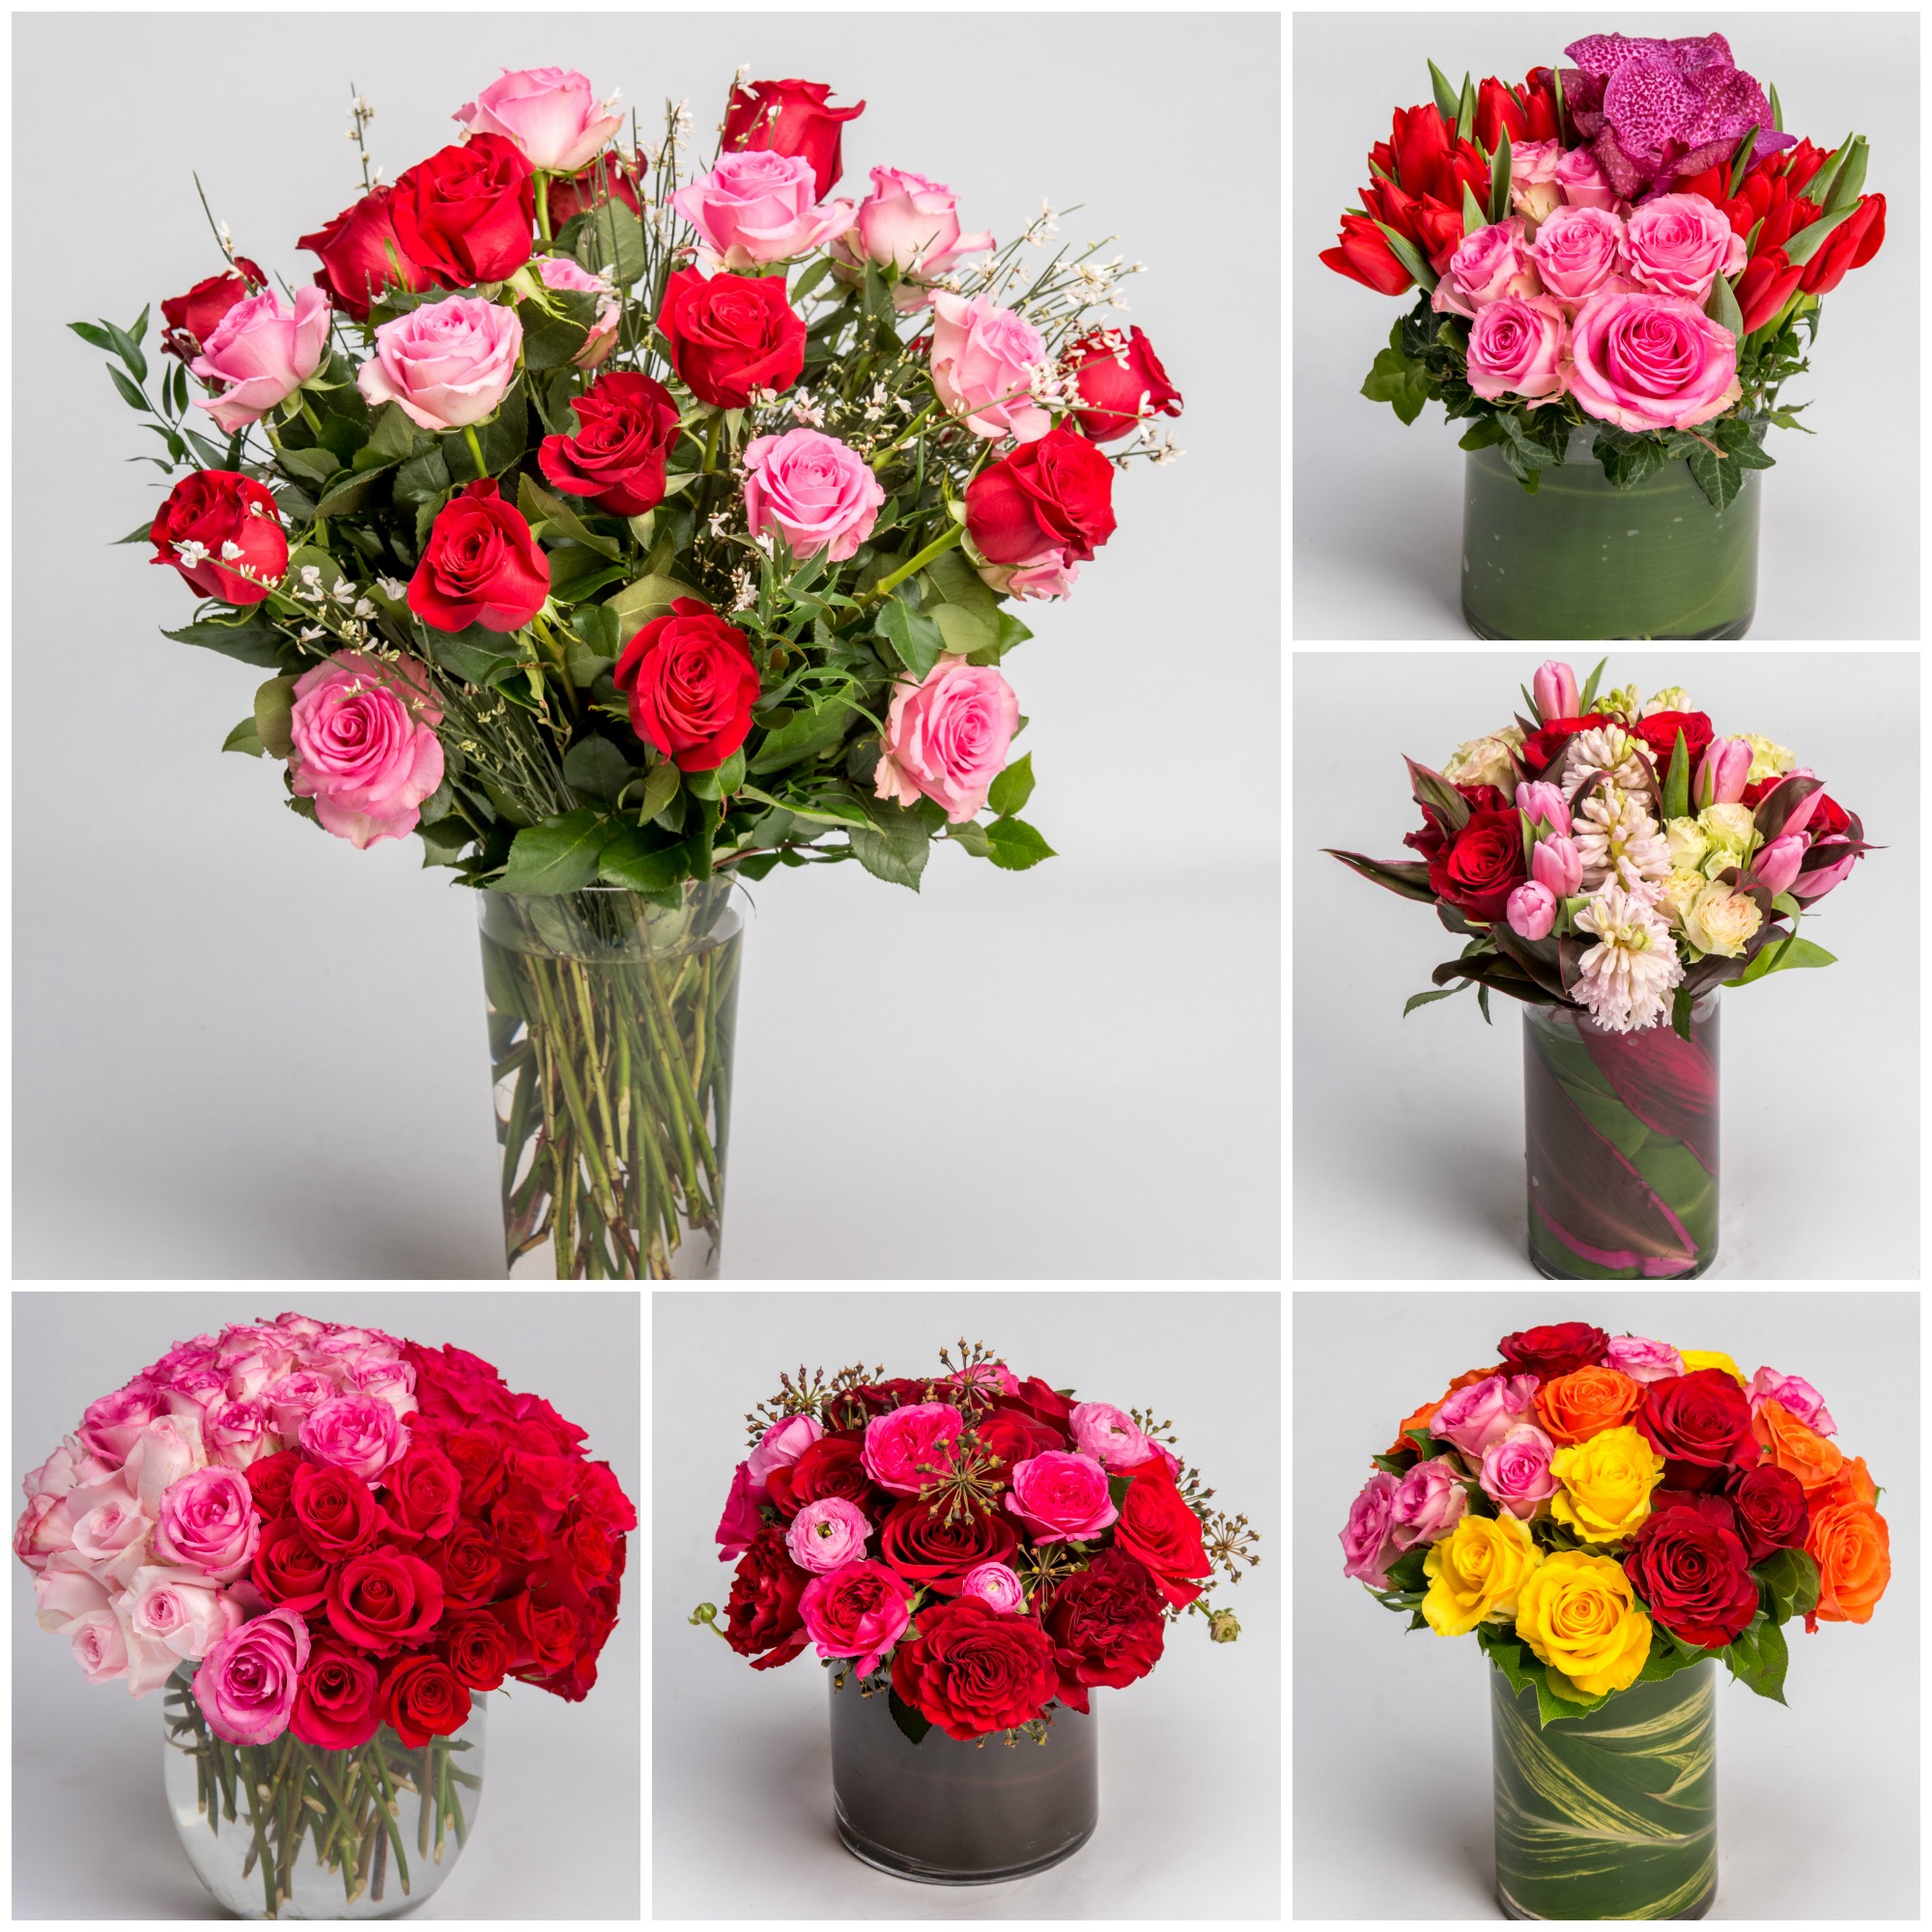 From classic long stem roses to modern mixes, our Valentine's Day collection has something special for your special someone. Visit our website to view the complete Valentine's Day collection!